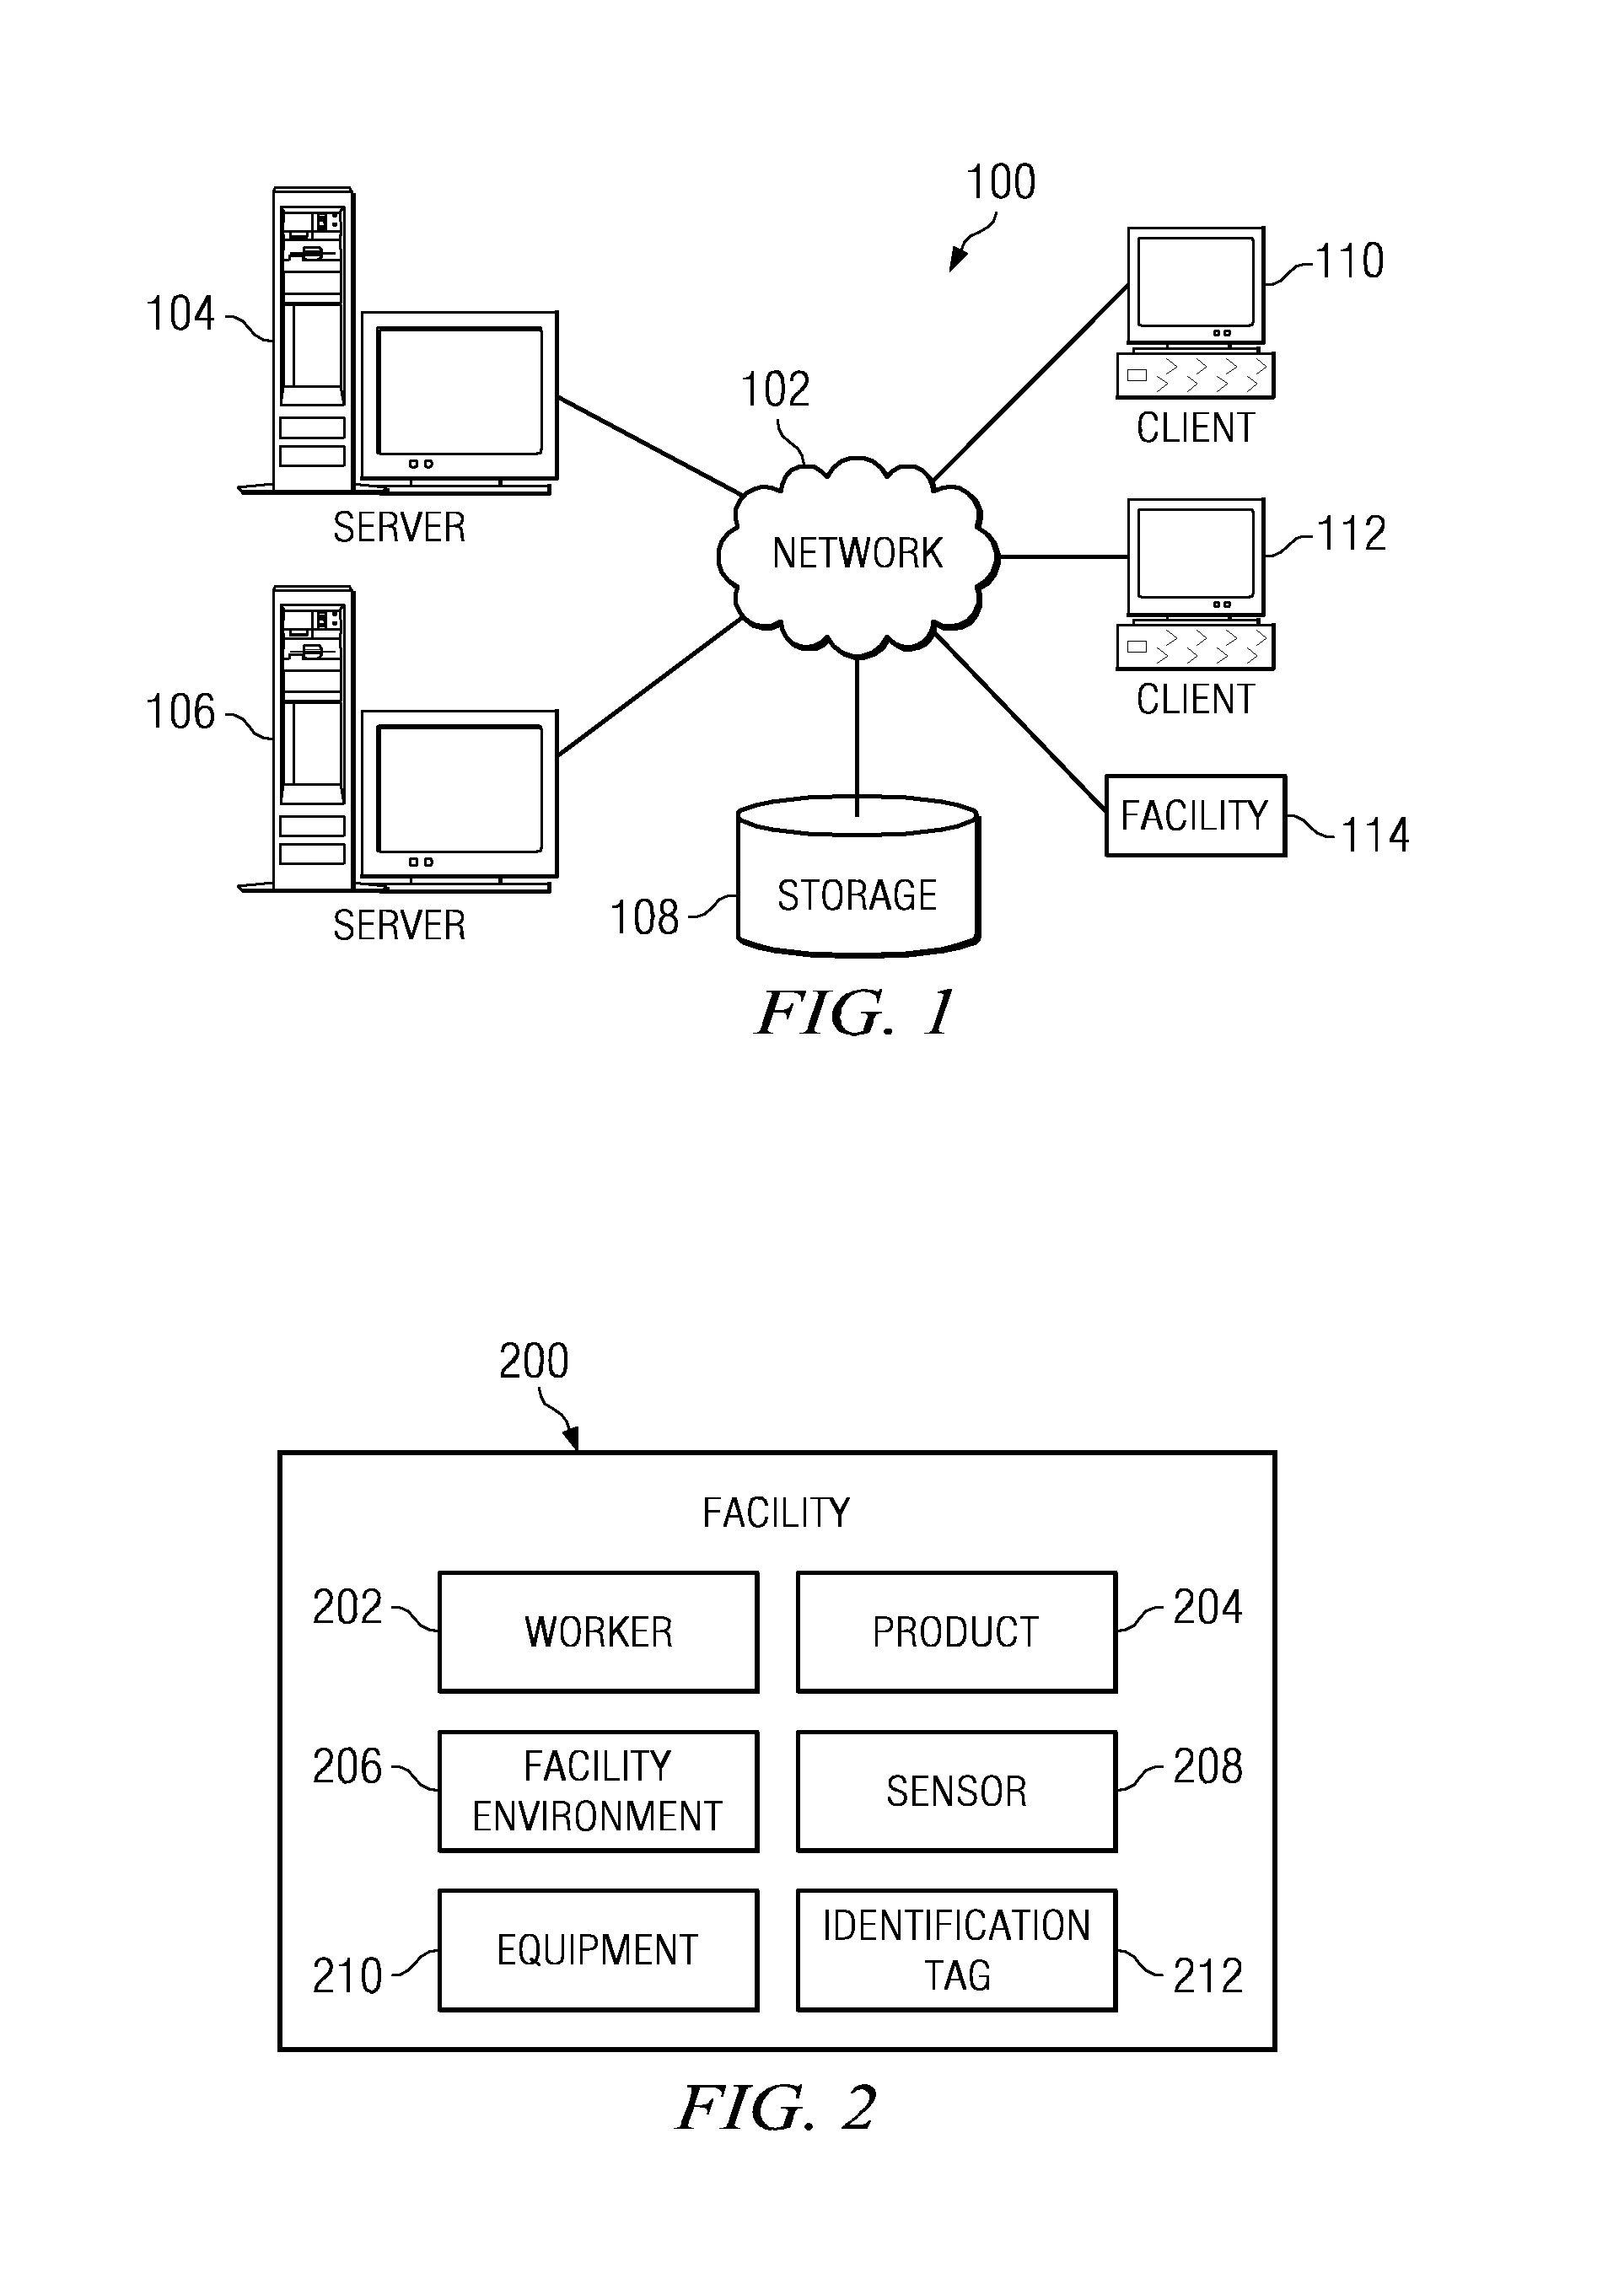 Method and apparatus for automatically identifying potentially unsafe work conditions to predict and prevent the occurrence of workplace accidents